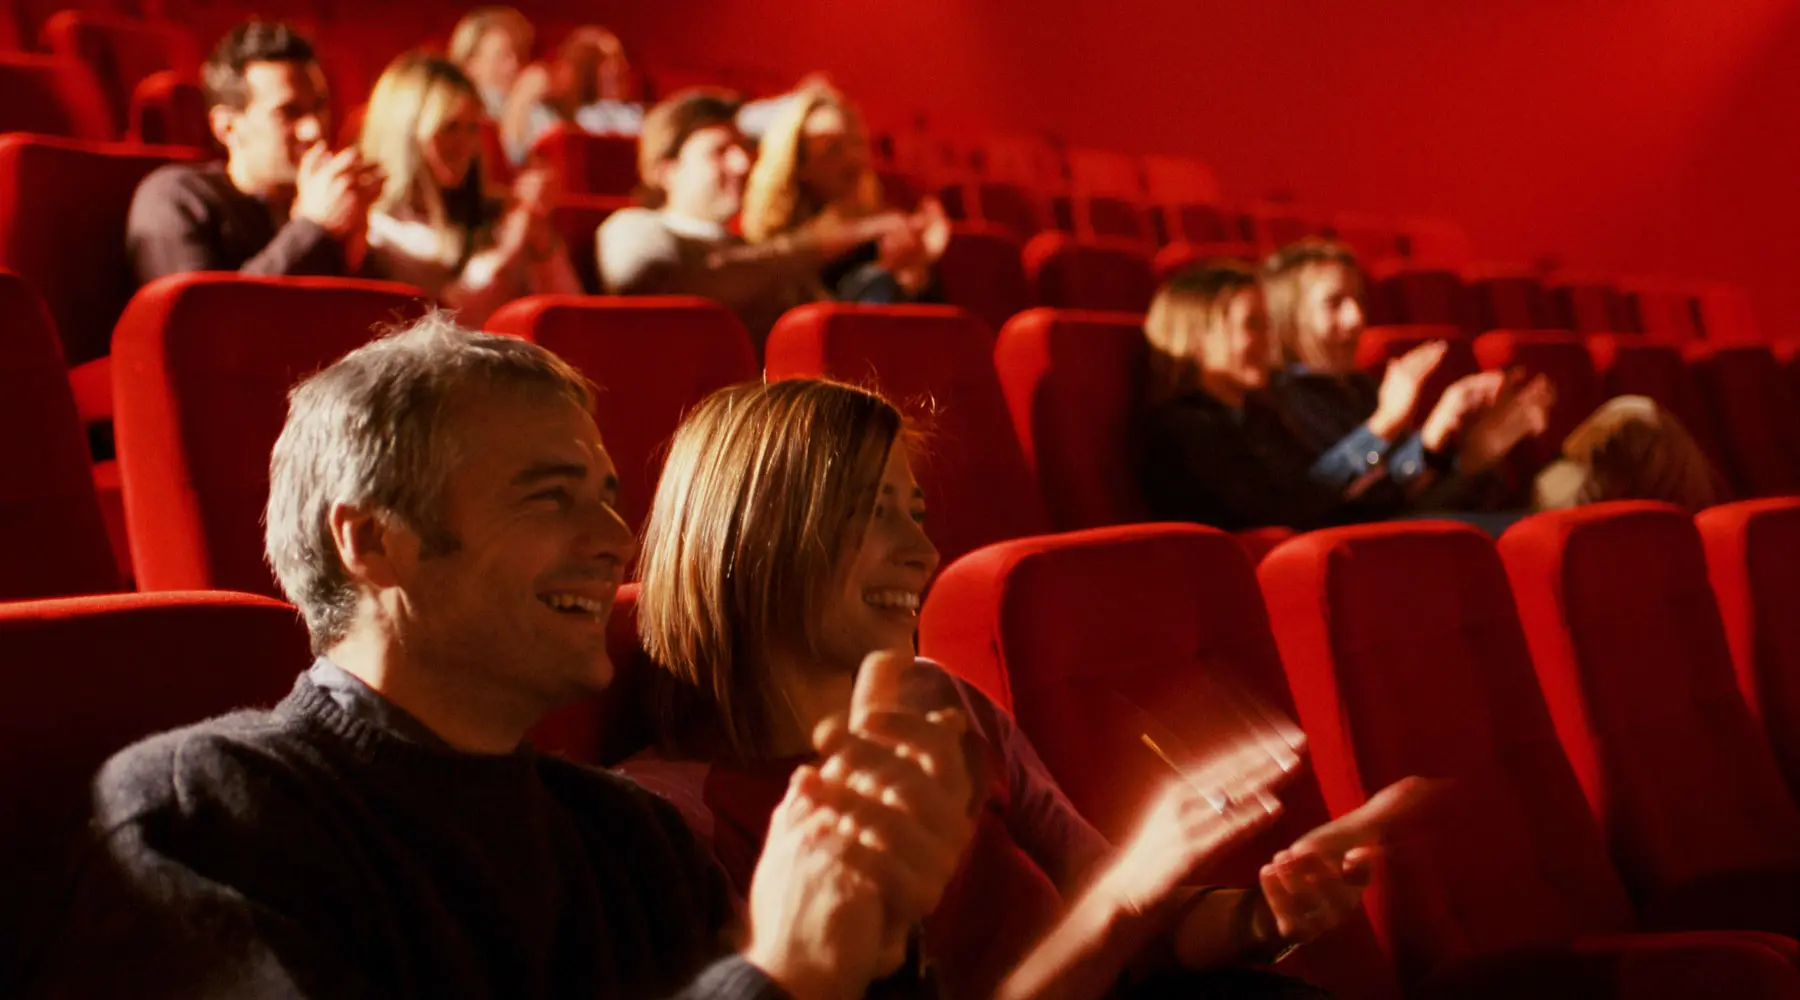 CROWD APPLAUDING in the cinema